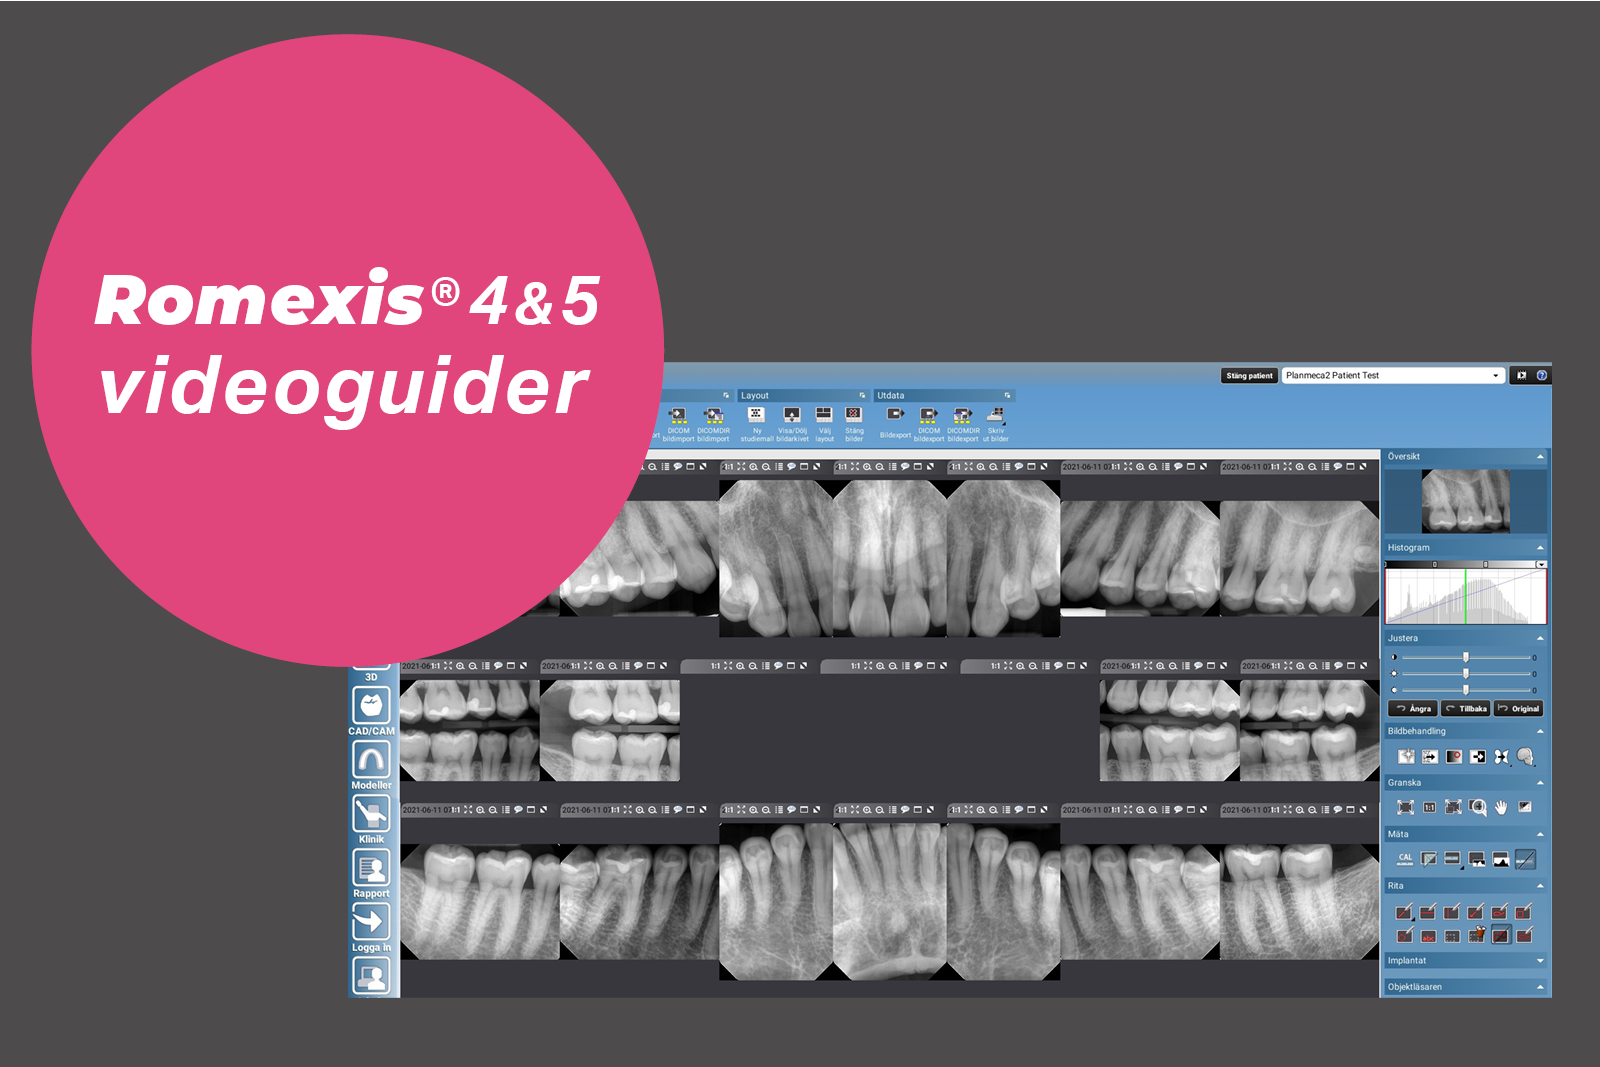 romexis-4-5-videogudier-banner-3x2.png